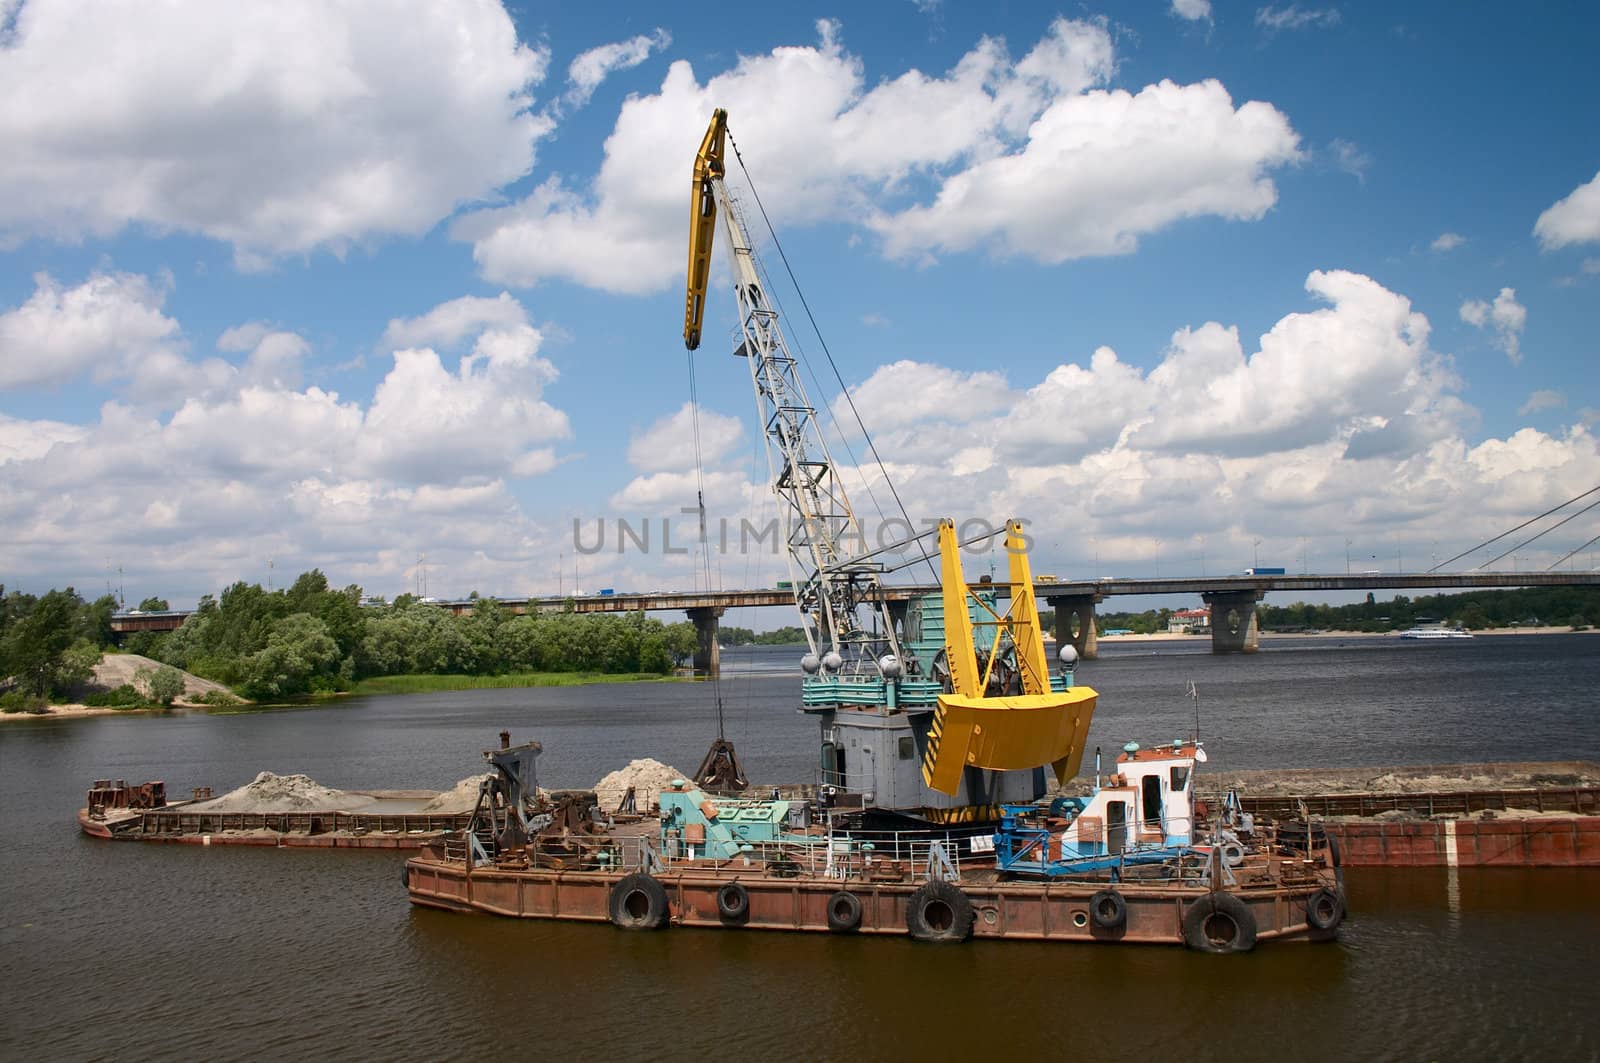 hydraulic dredge on barge in the working river